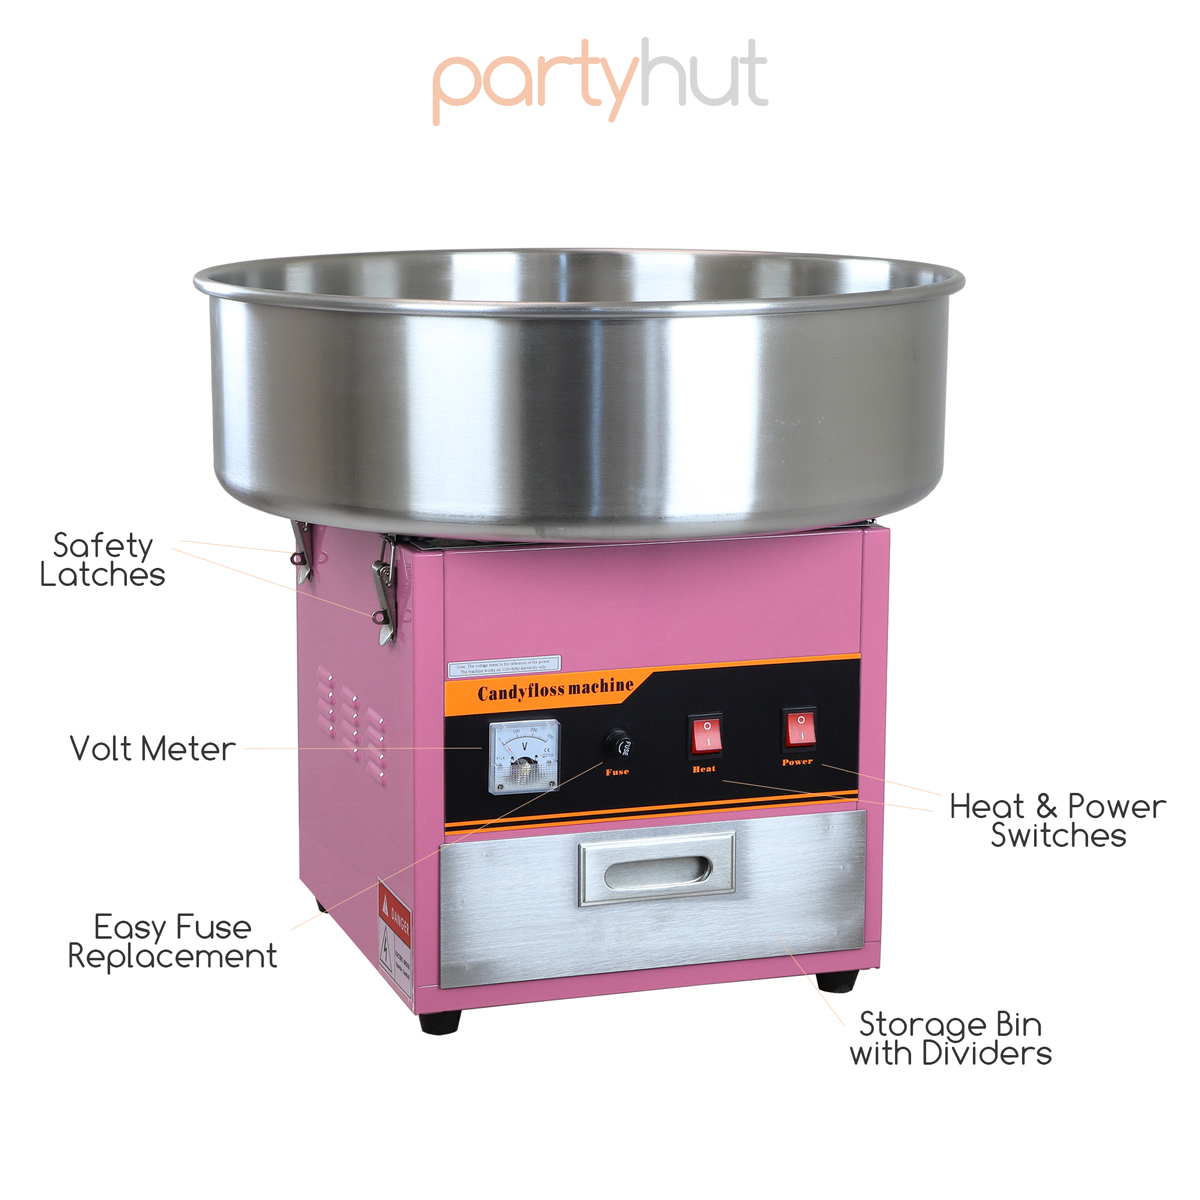 PartyHut Large Commercial Cotton Candy Machine Party Candy Floss Maker Pink